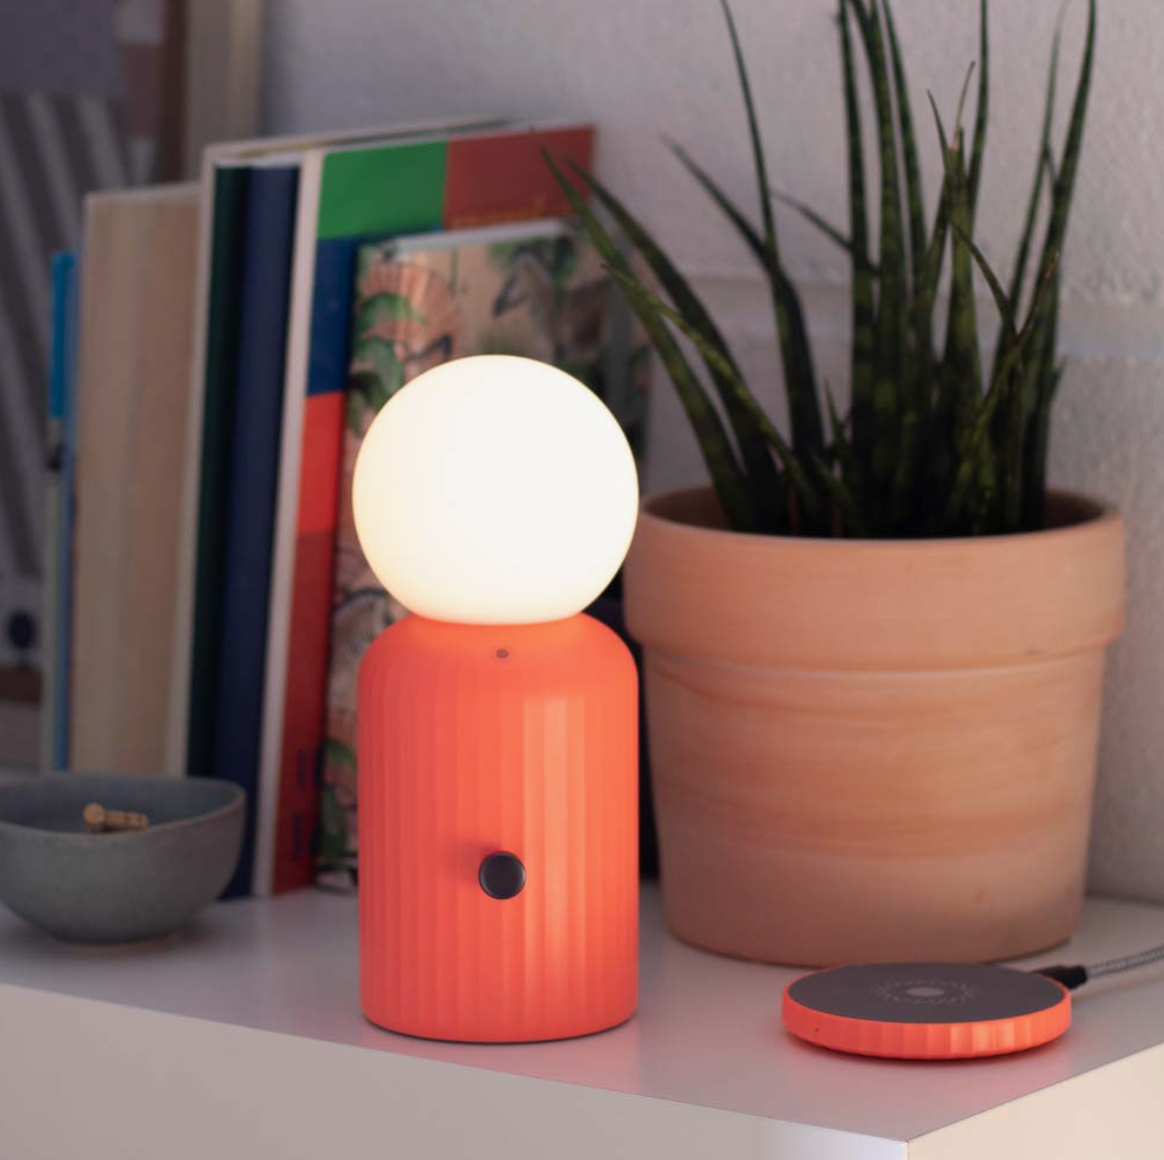 WIRELESS LAMP AND CHARGER